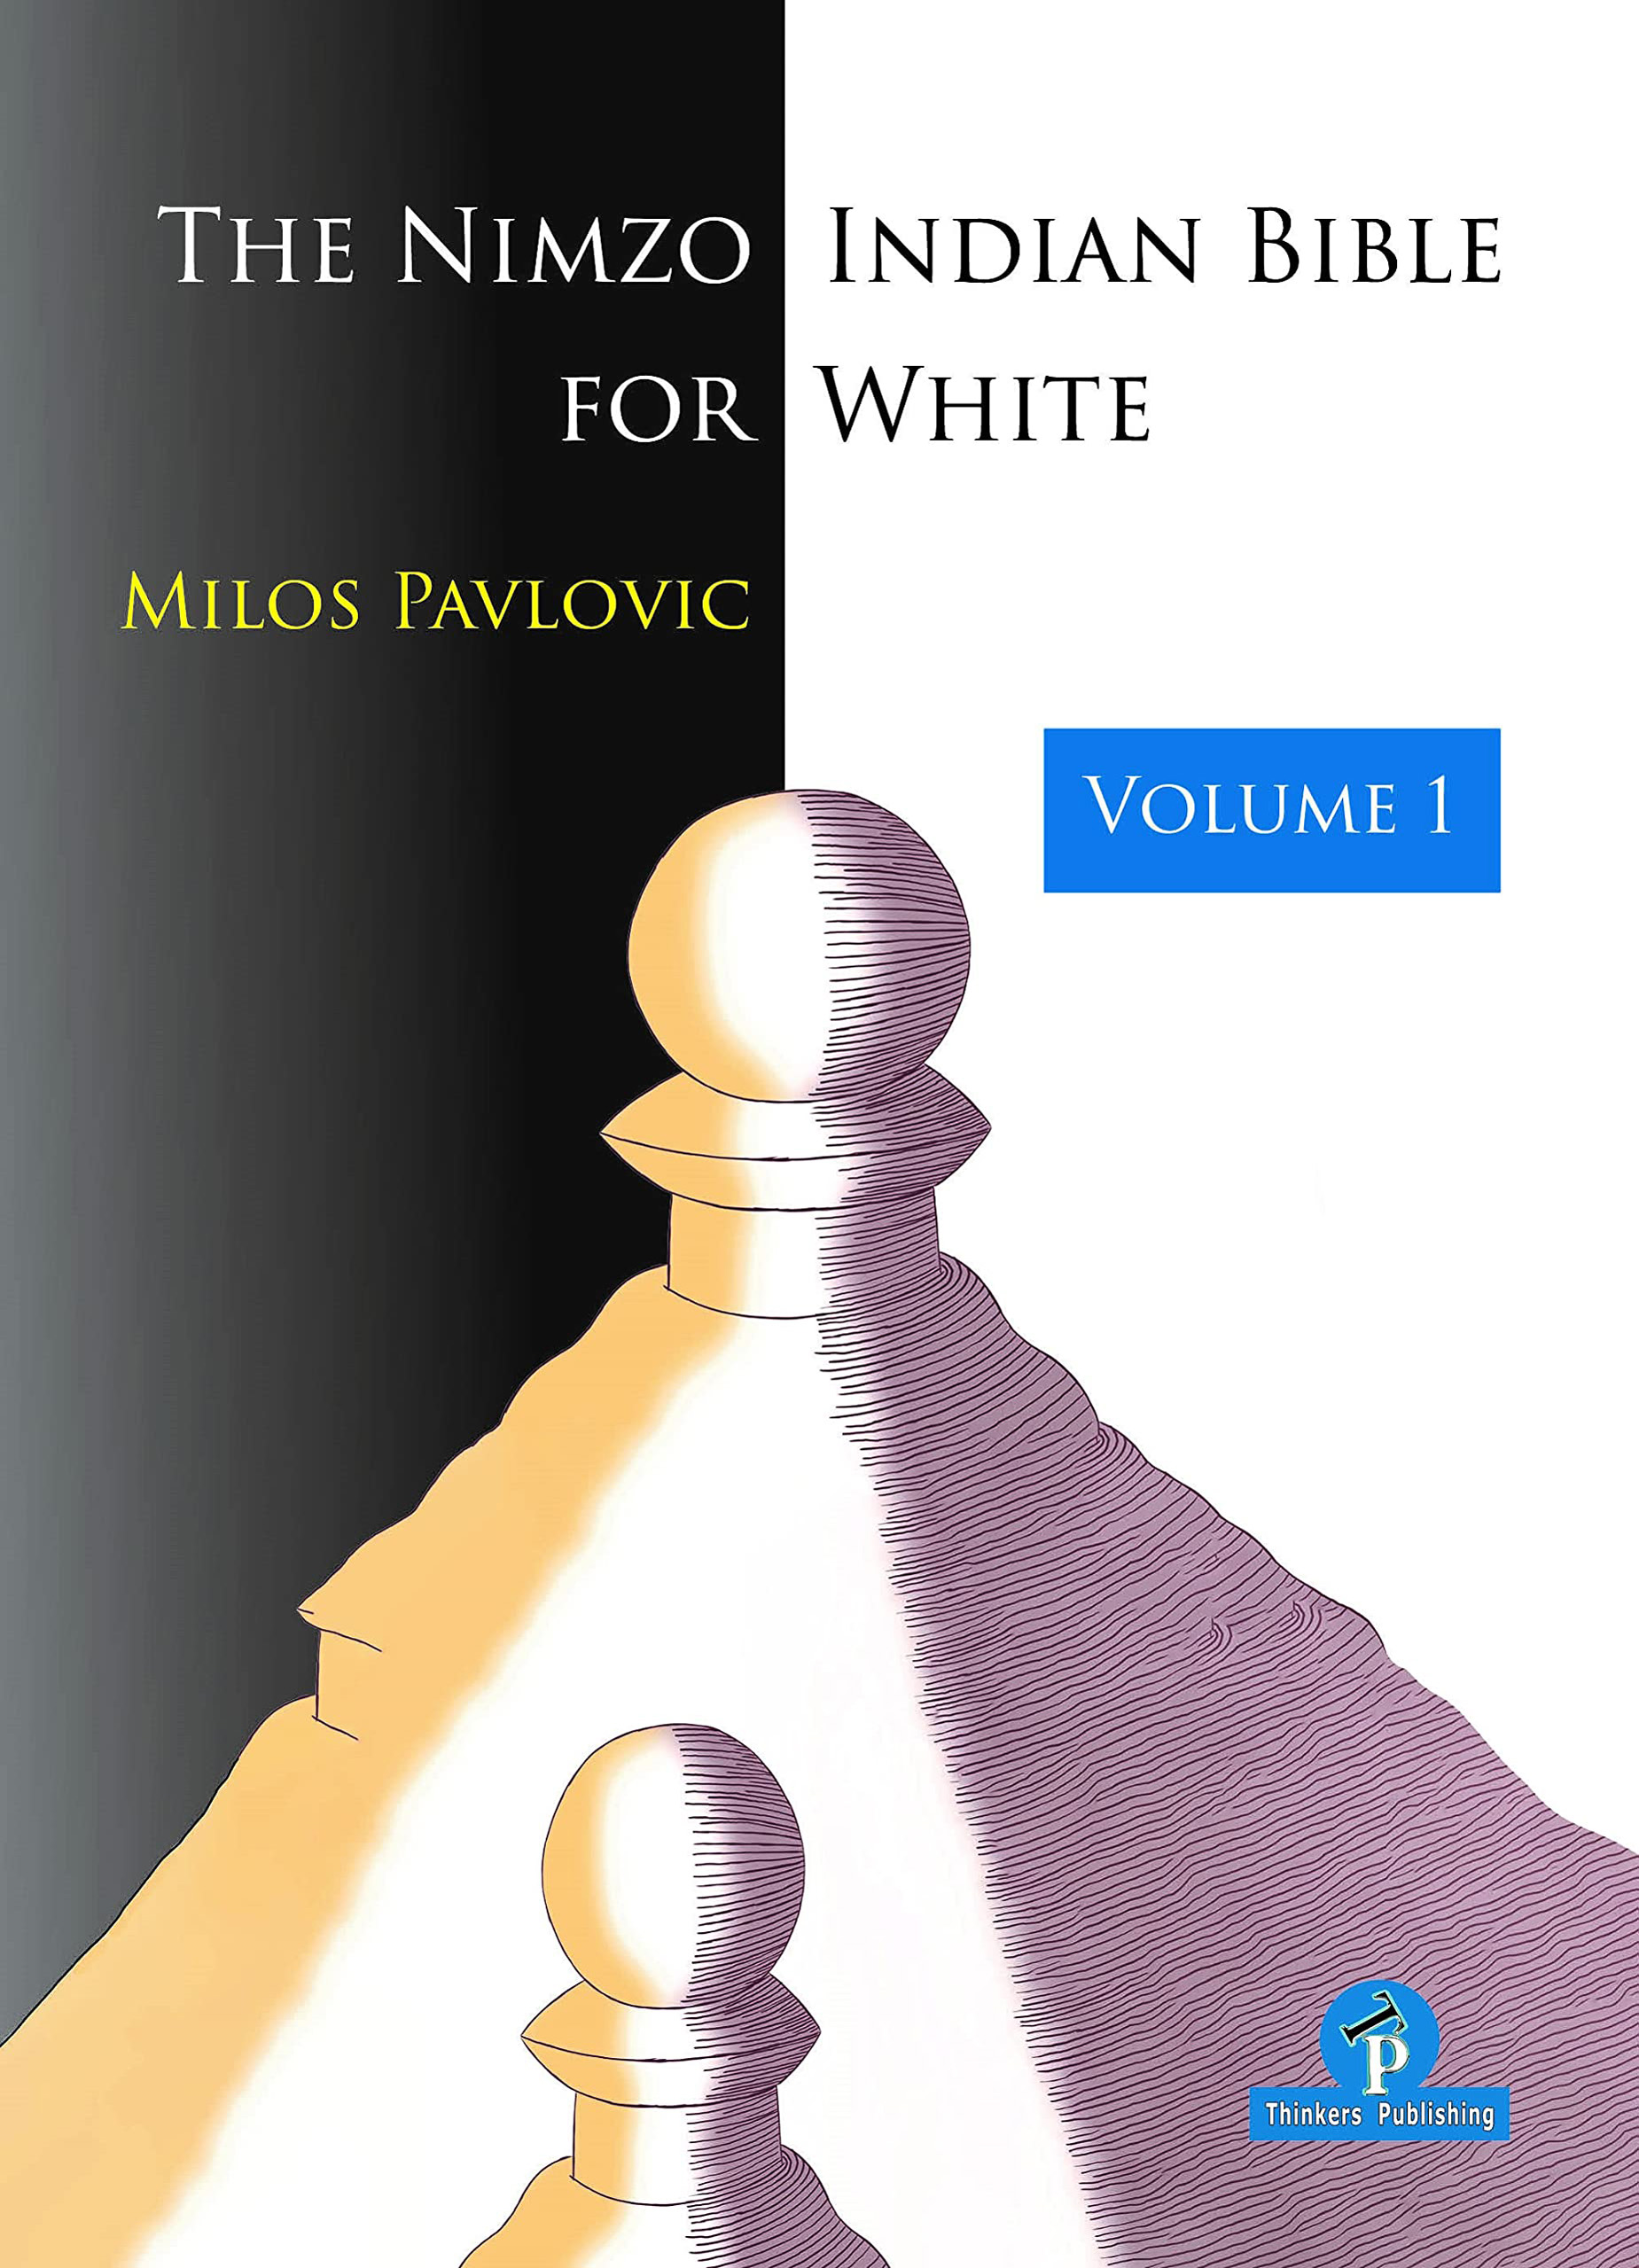 The Nimzo-Indian Bible for White Volume 1